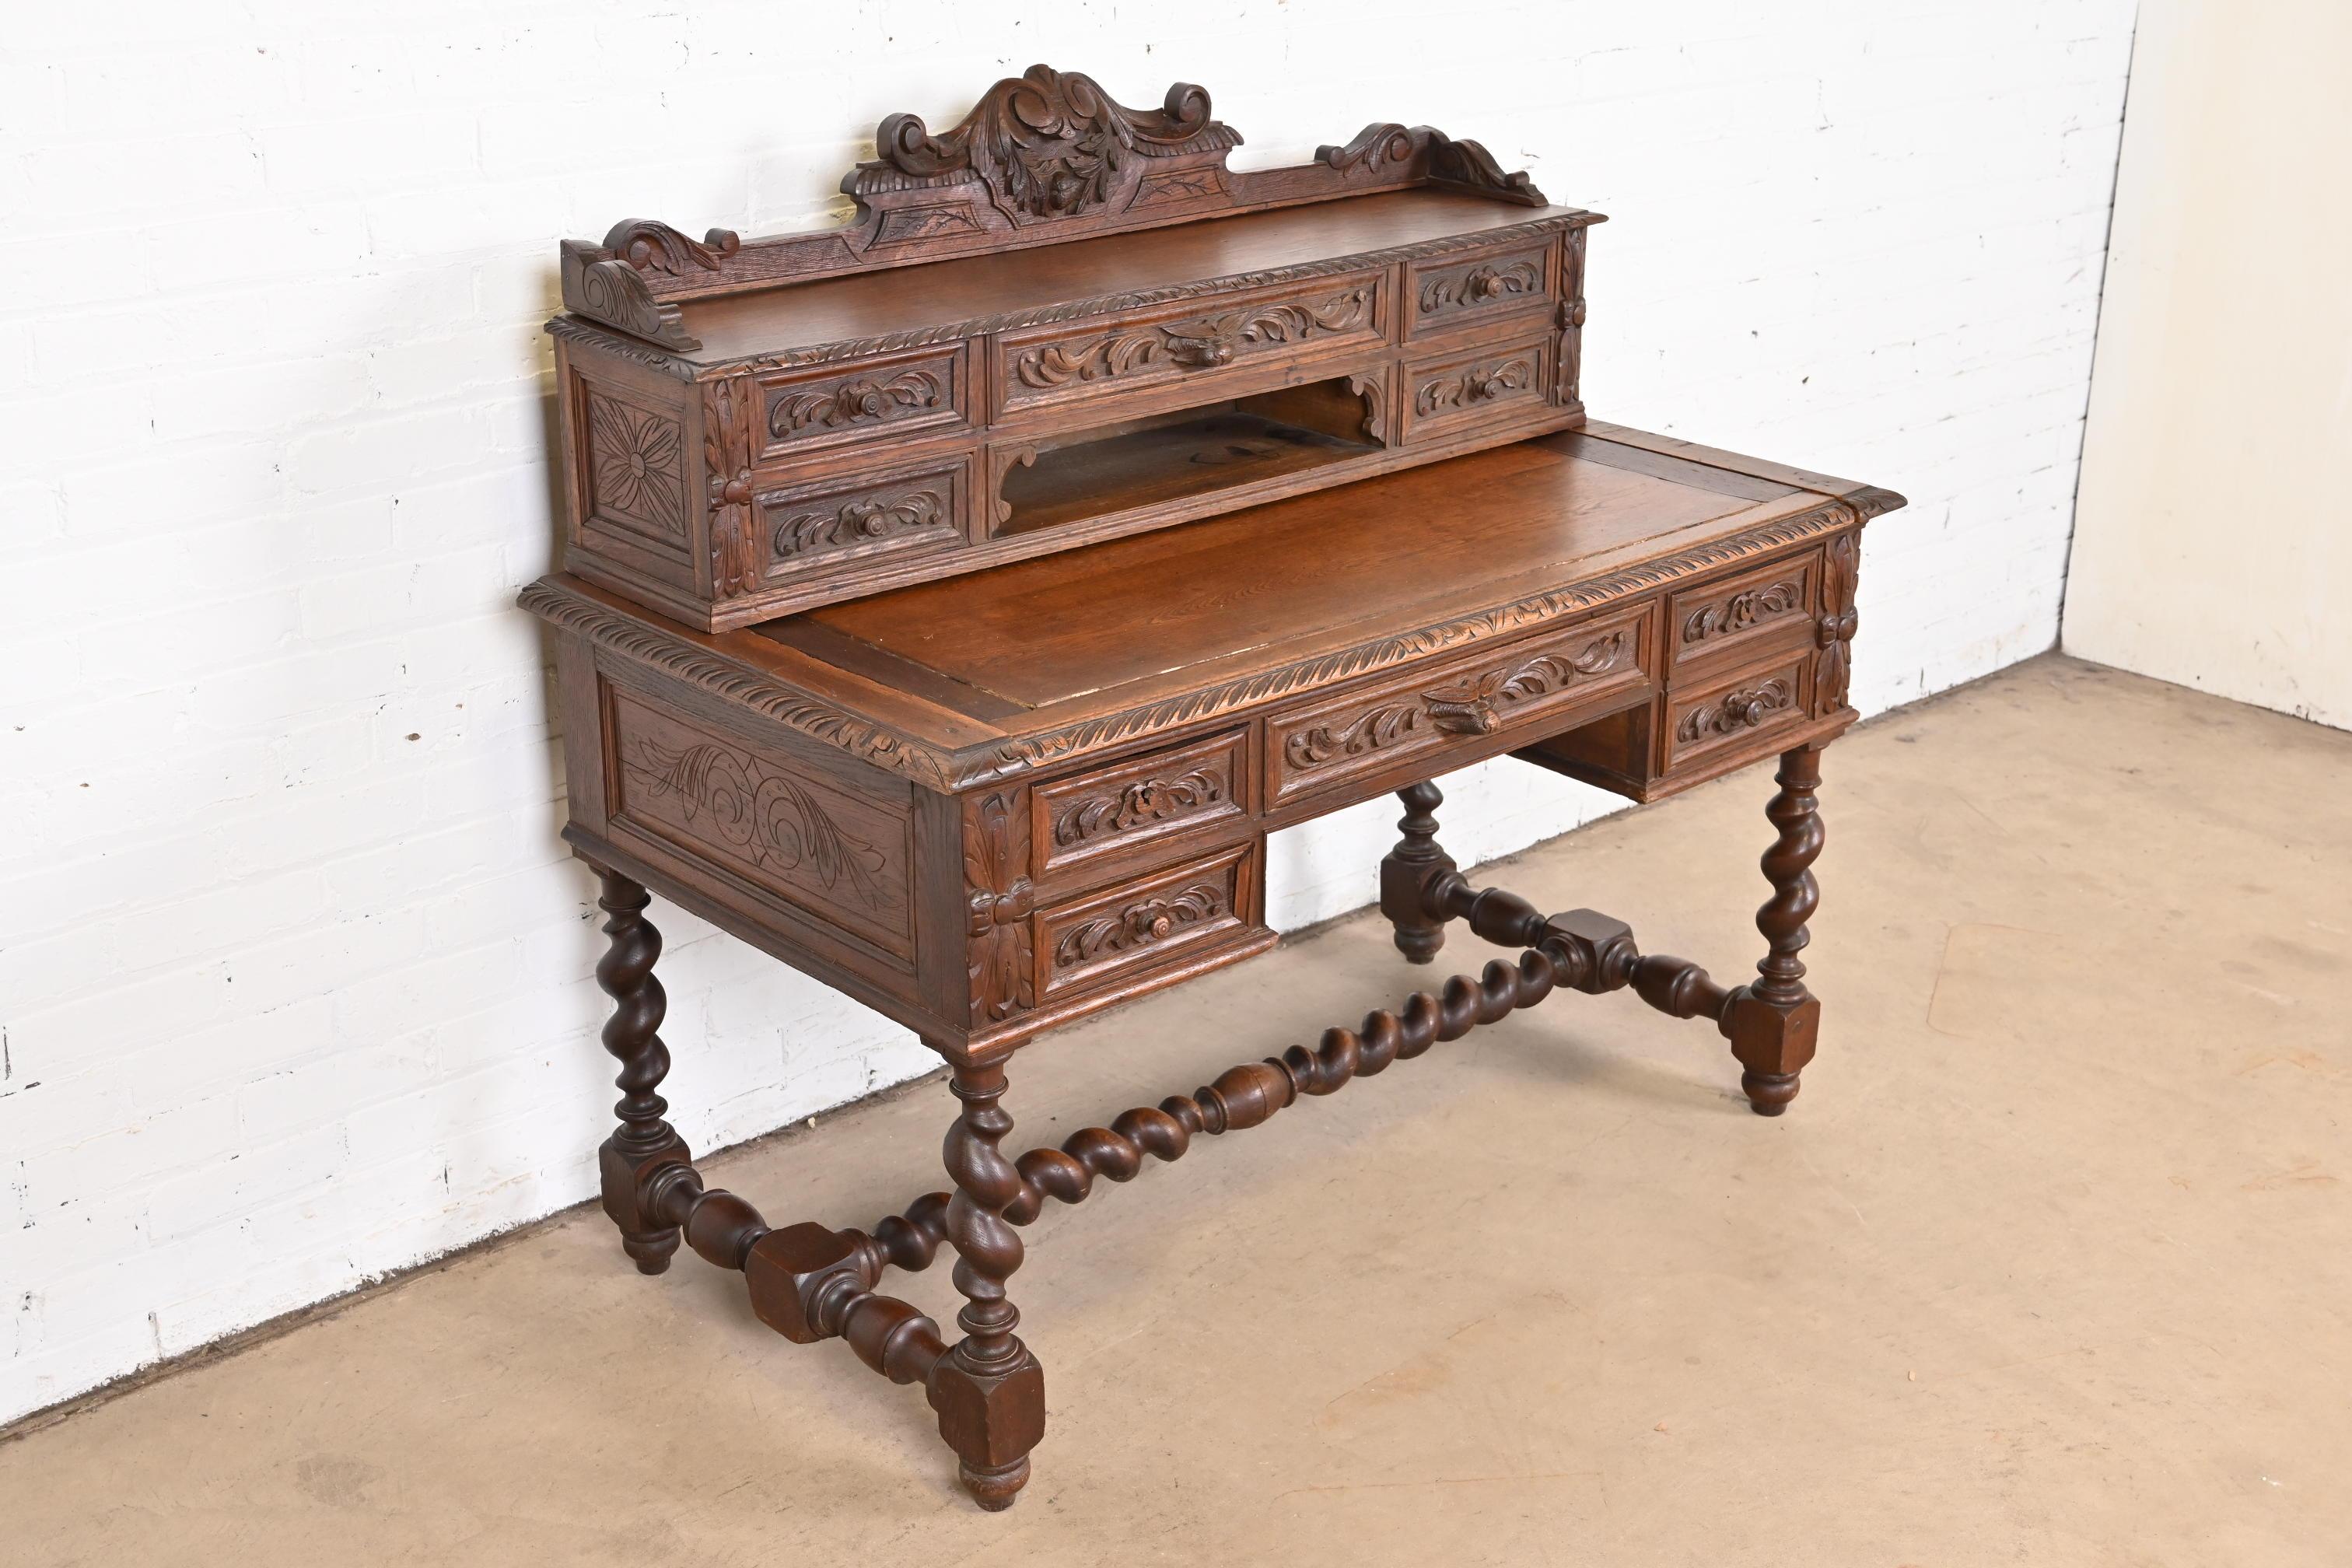 19th Century French Black Forest Carved Oak Writing Desk With Barley Twist Legs For Sale 2